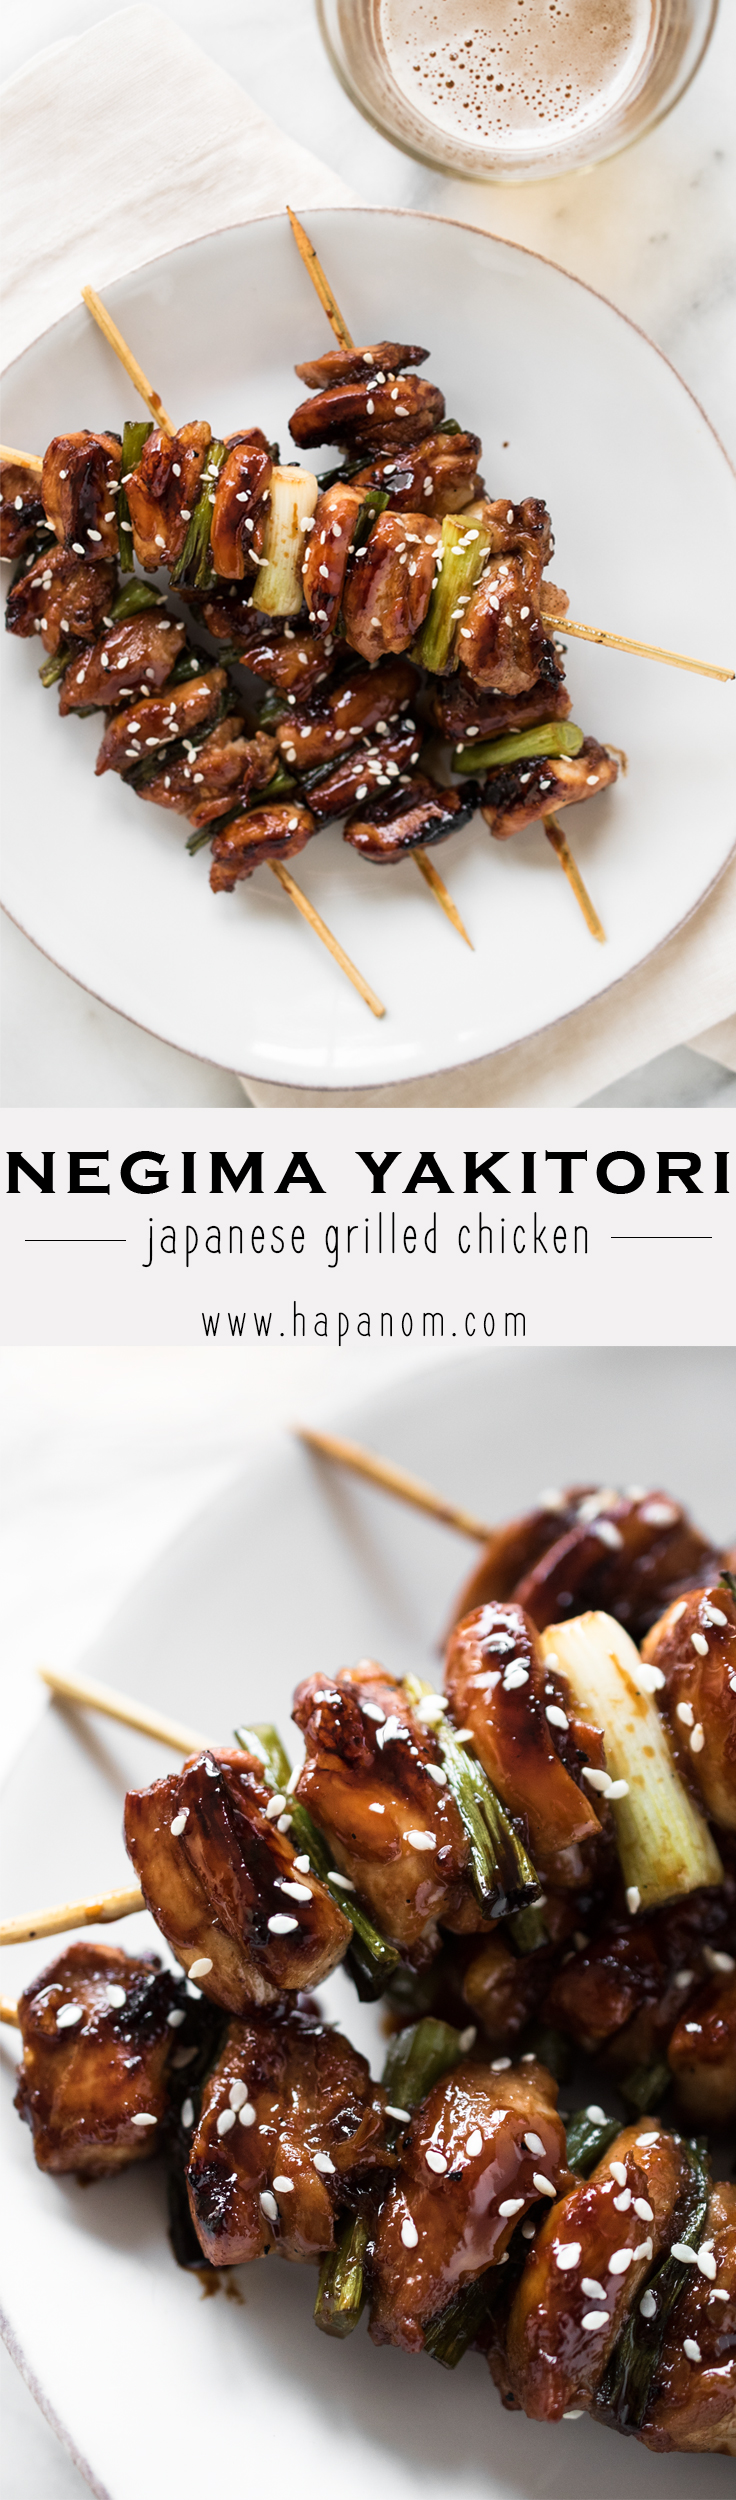 Tender, juicy, and packed with flavor! Serve with an ice-cold beer, and you have your own in-home izakaya.